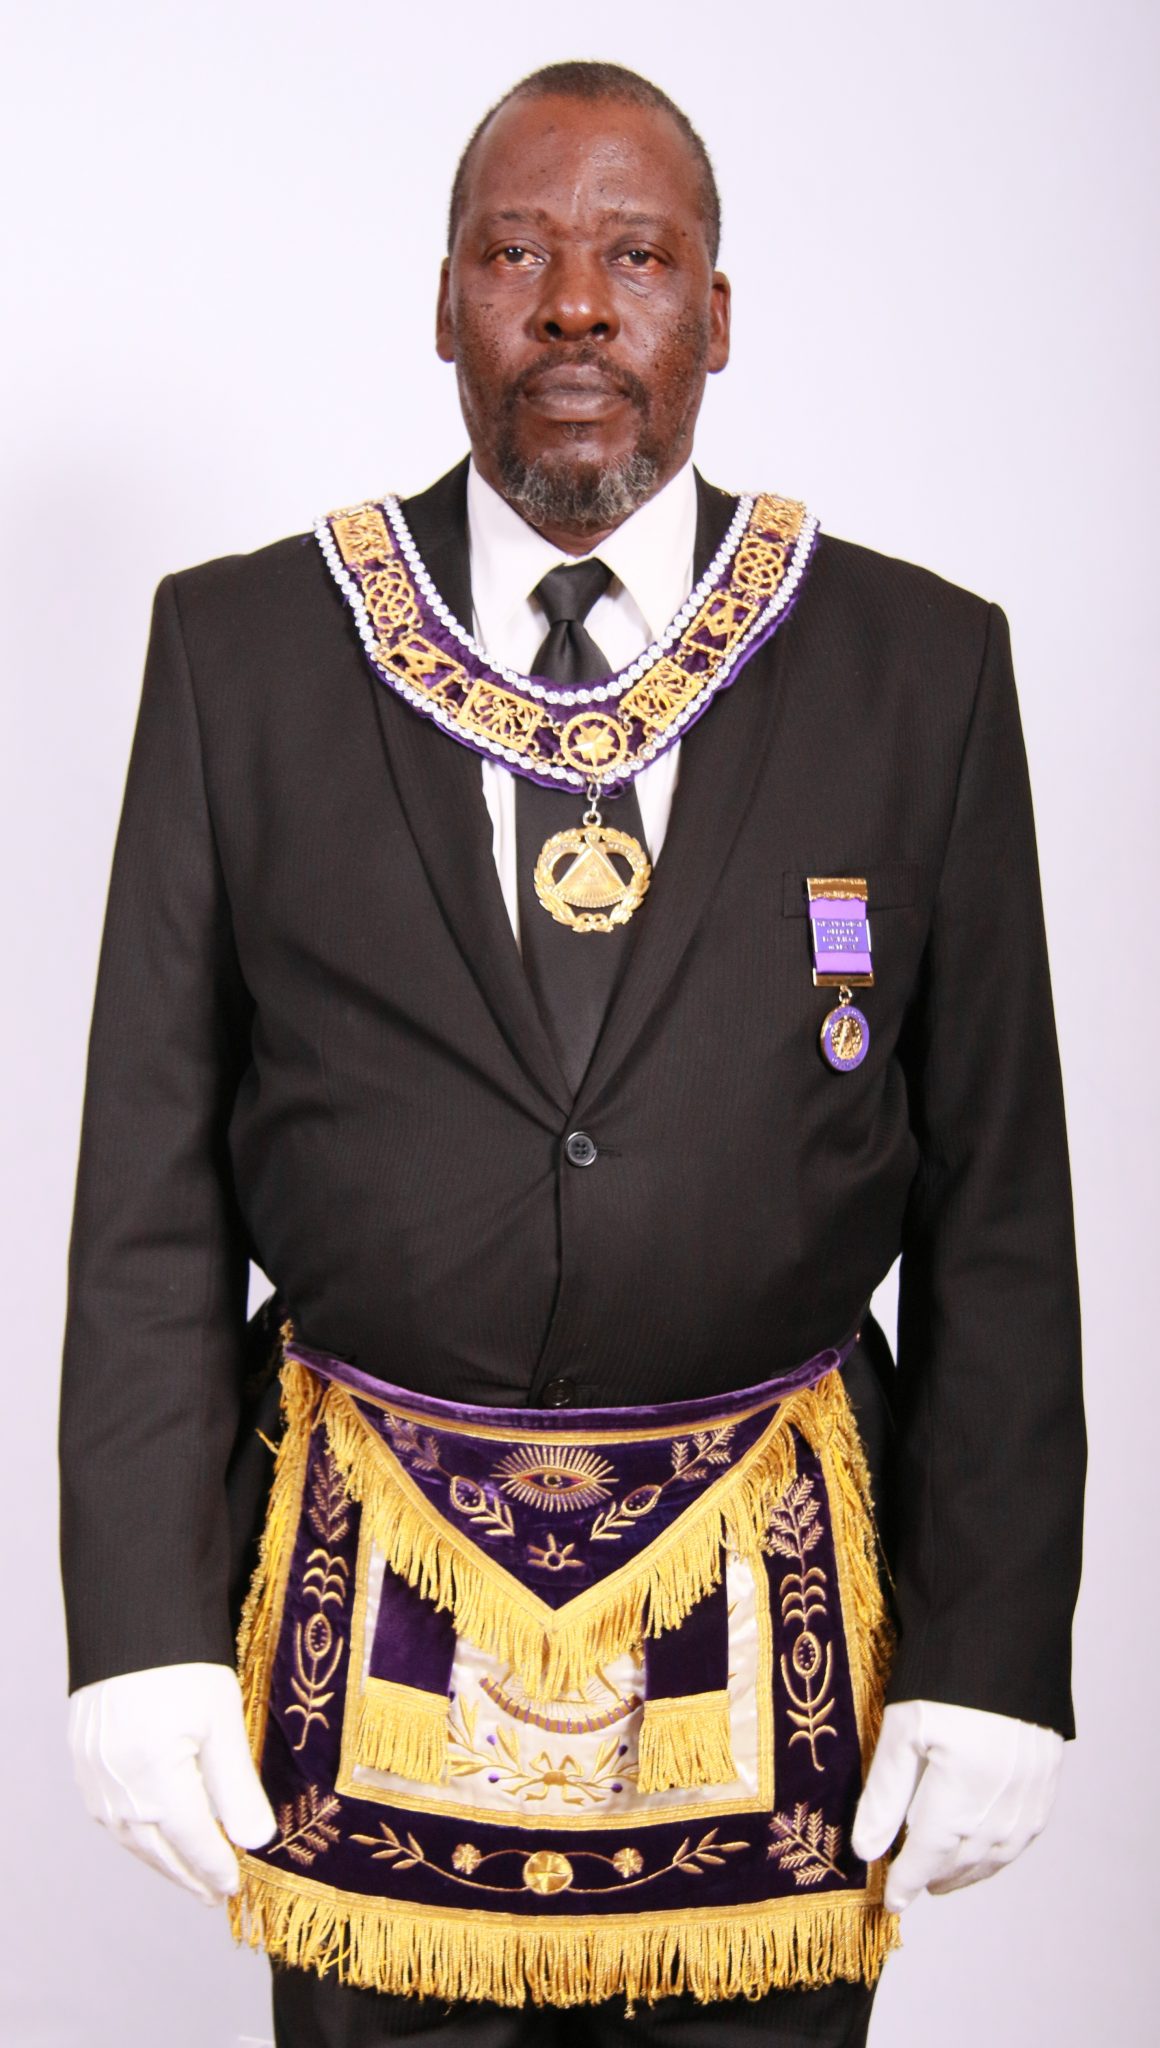 Grand Master Michael T. Anderson The Most Worshipful Prince Hall